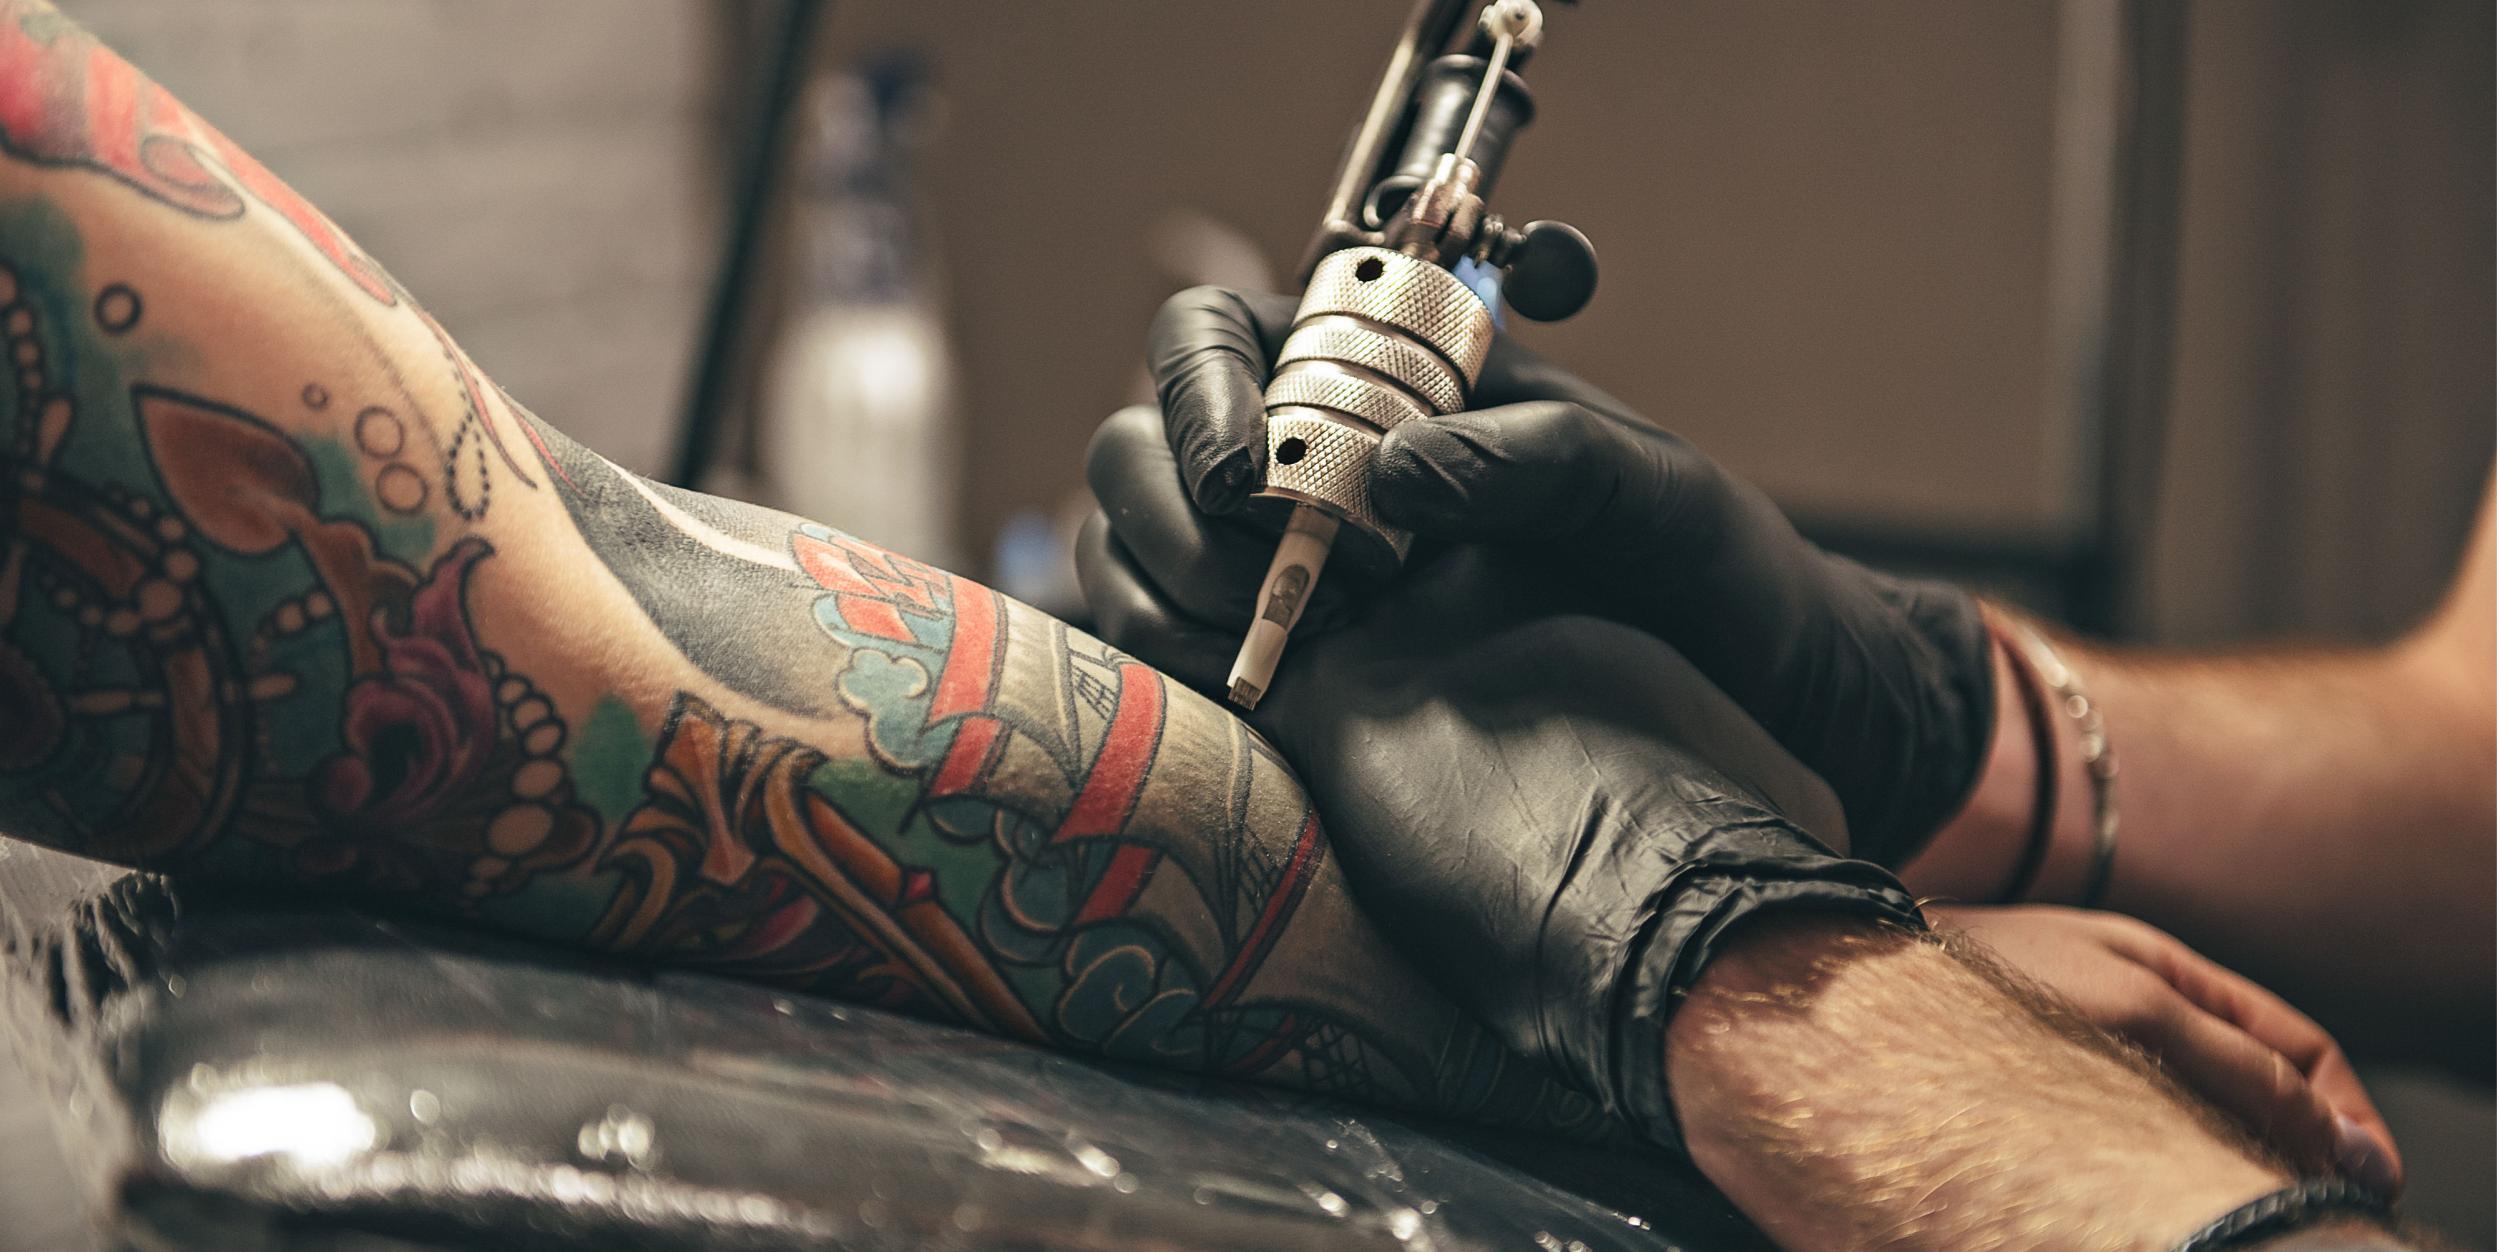 Tattoos of someone's name are the most-commonly regretted design, poll finds